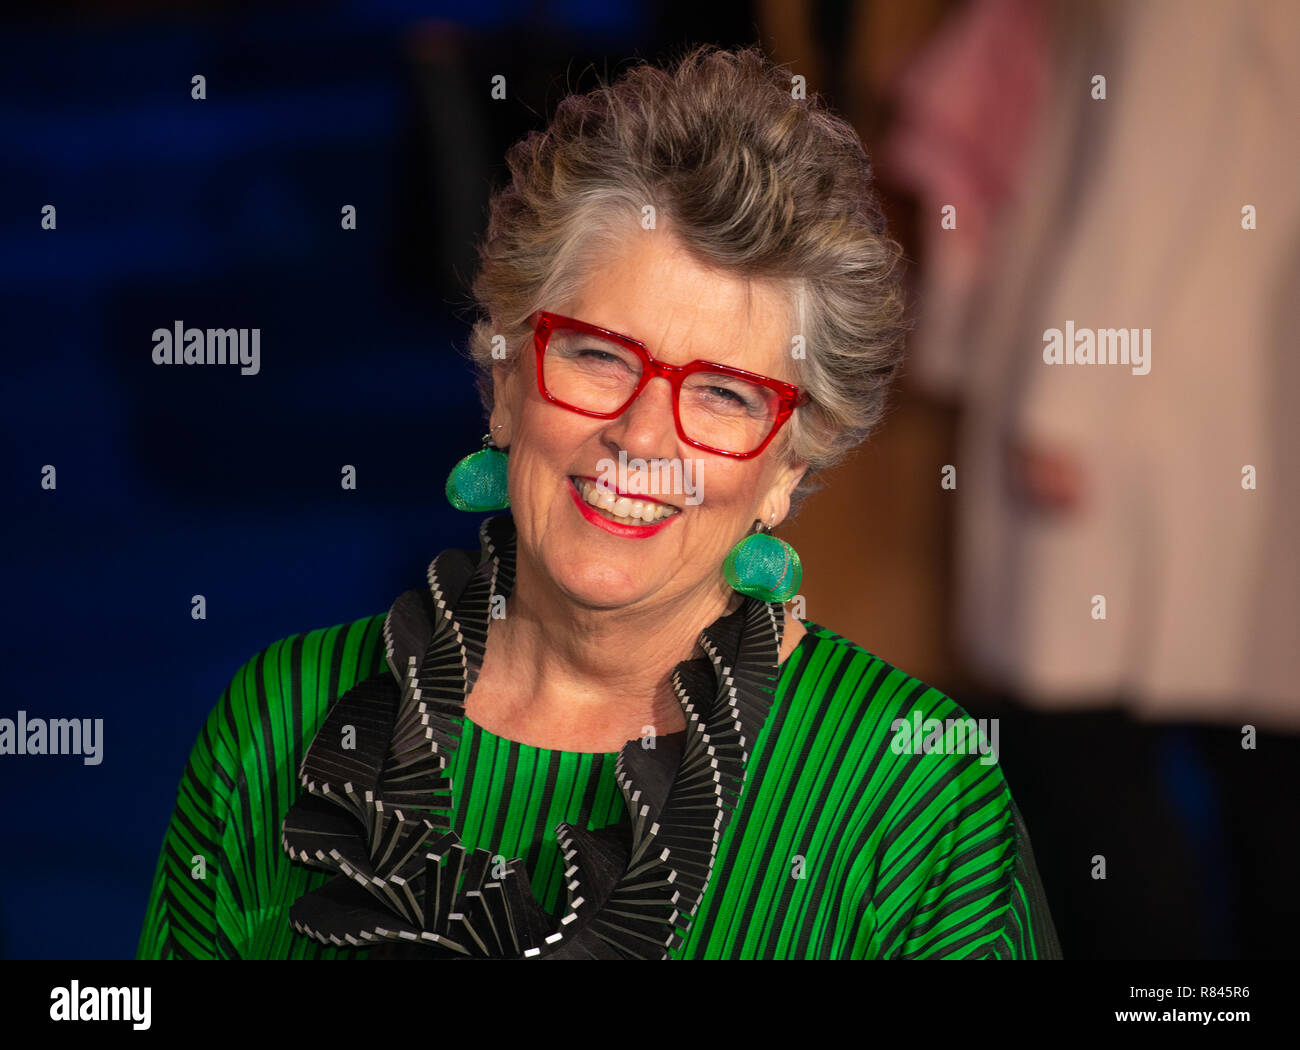 Prue Leith presenter, Broadcaster, Journalist, cookery writer and novelist, arrives for the Premiere of 'Mary Poppins Returns' in London. Stock Photo